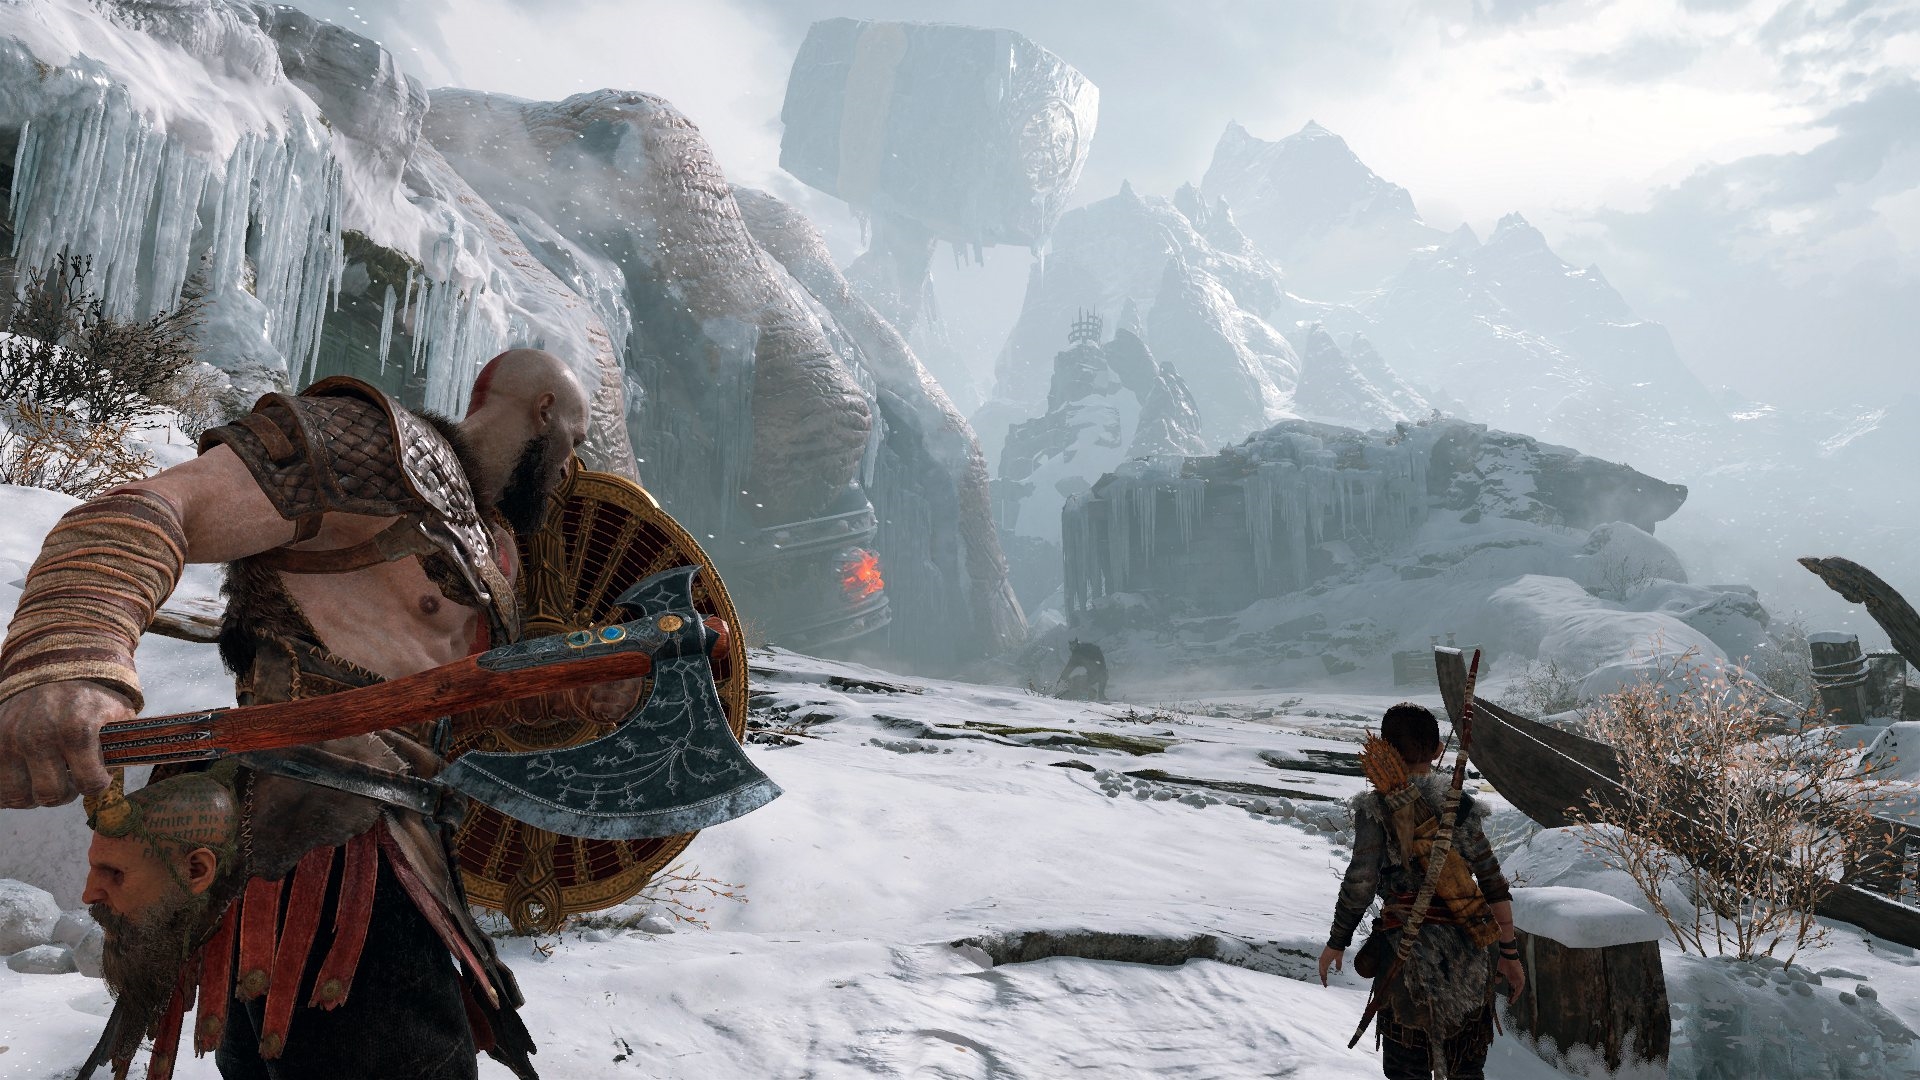 'God of War' returns to form with good ol' father-son bonding | DeviceDaily.com